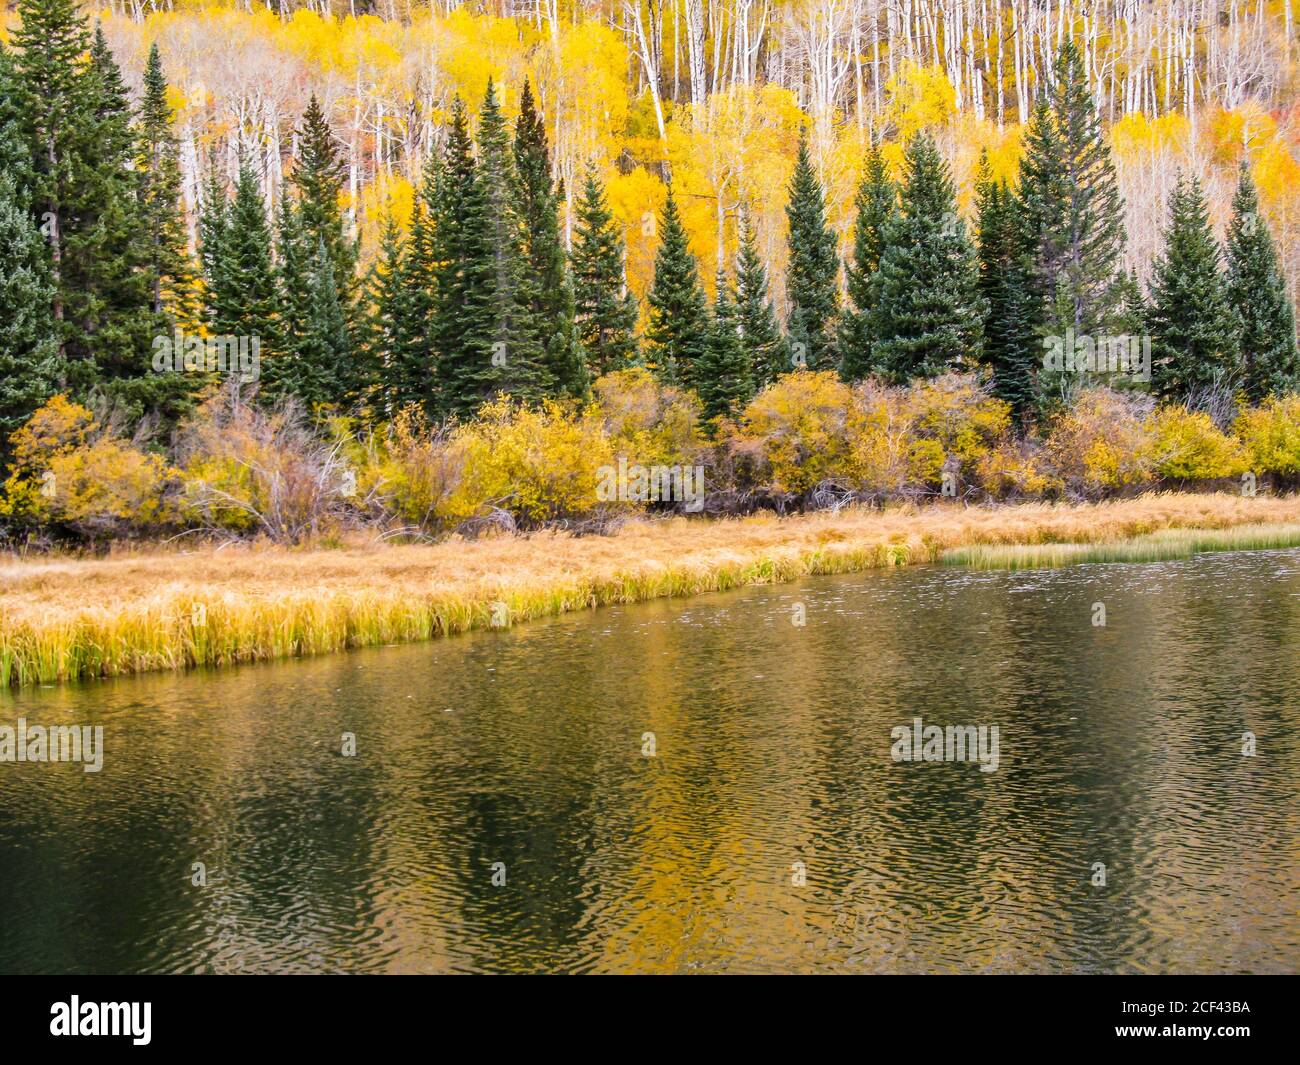 The forested slopes of the La Sal Mountains, in Utah USA, covered in Douglas-fir and Quaking Aspin Trees, reflecting in the calm water of Warner Lake Stock Photo